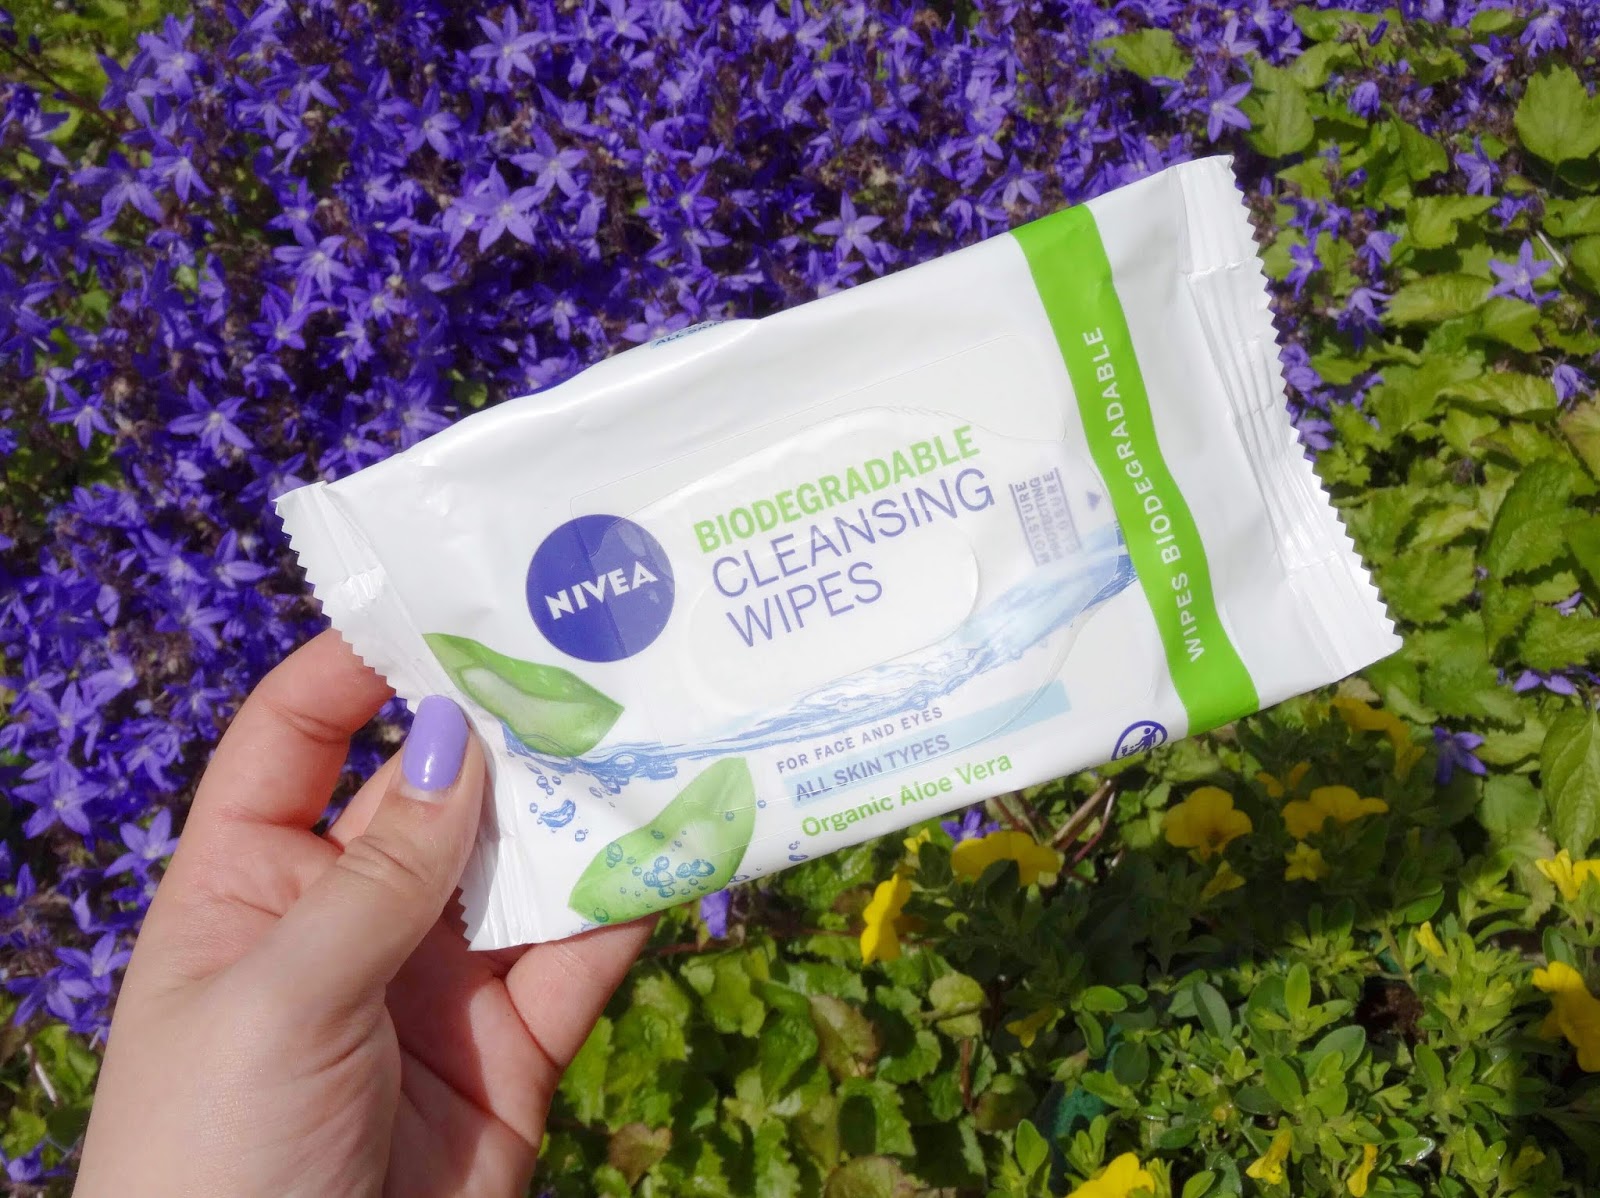 NEW Biodegradable Cleansing Wipes from Nivea